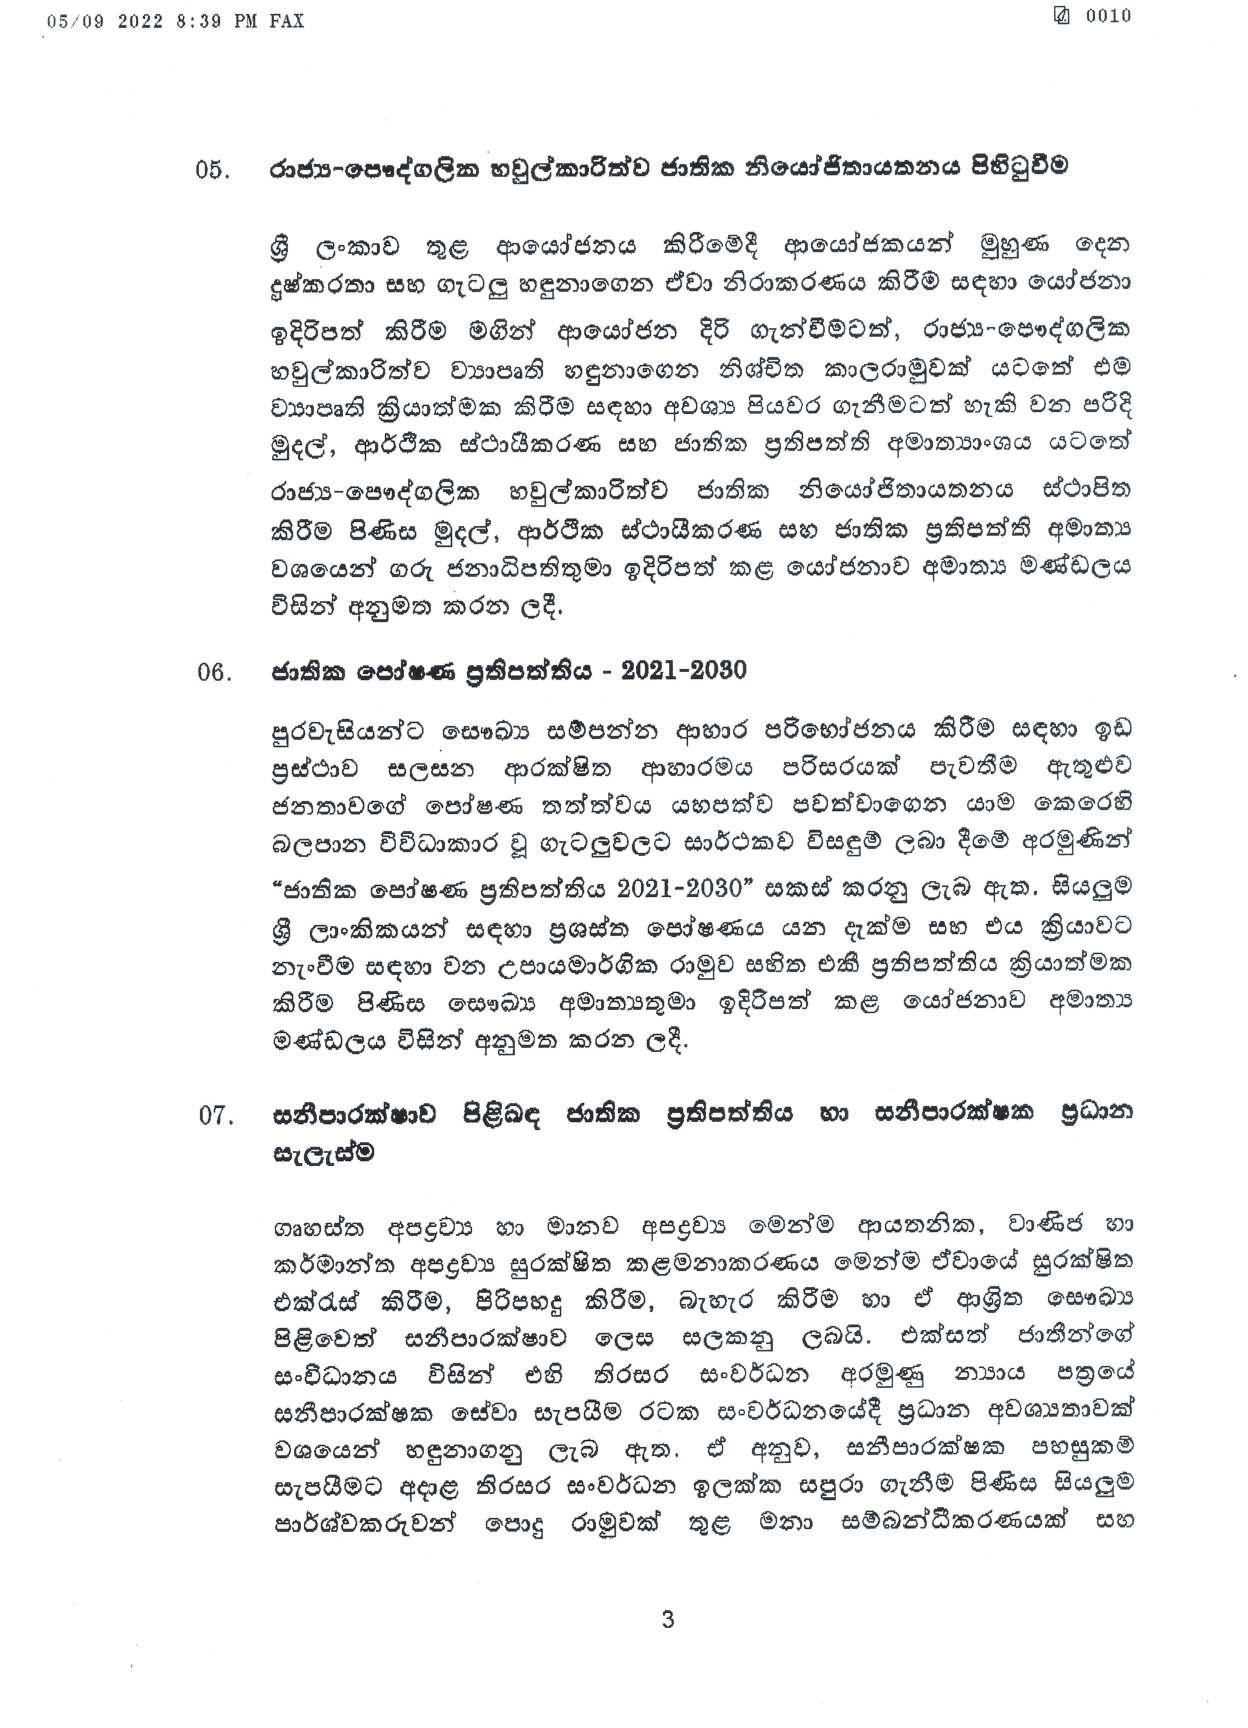 Cabinet Decision on 05.09.2022 page 003